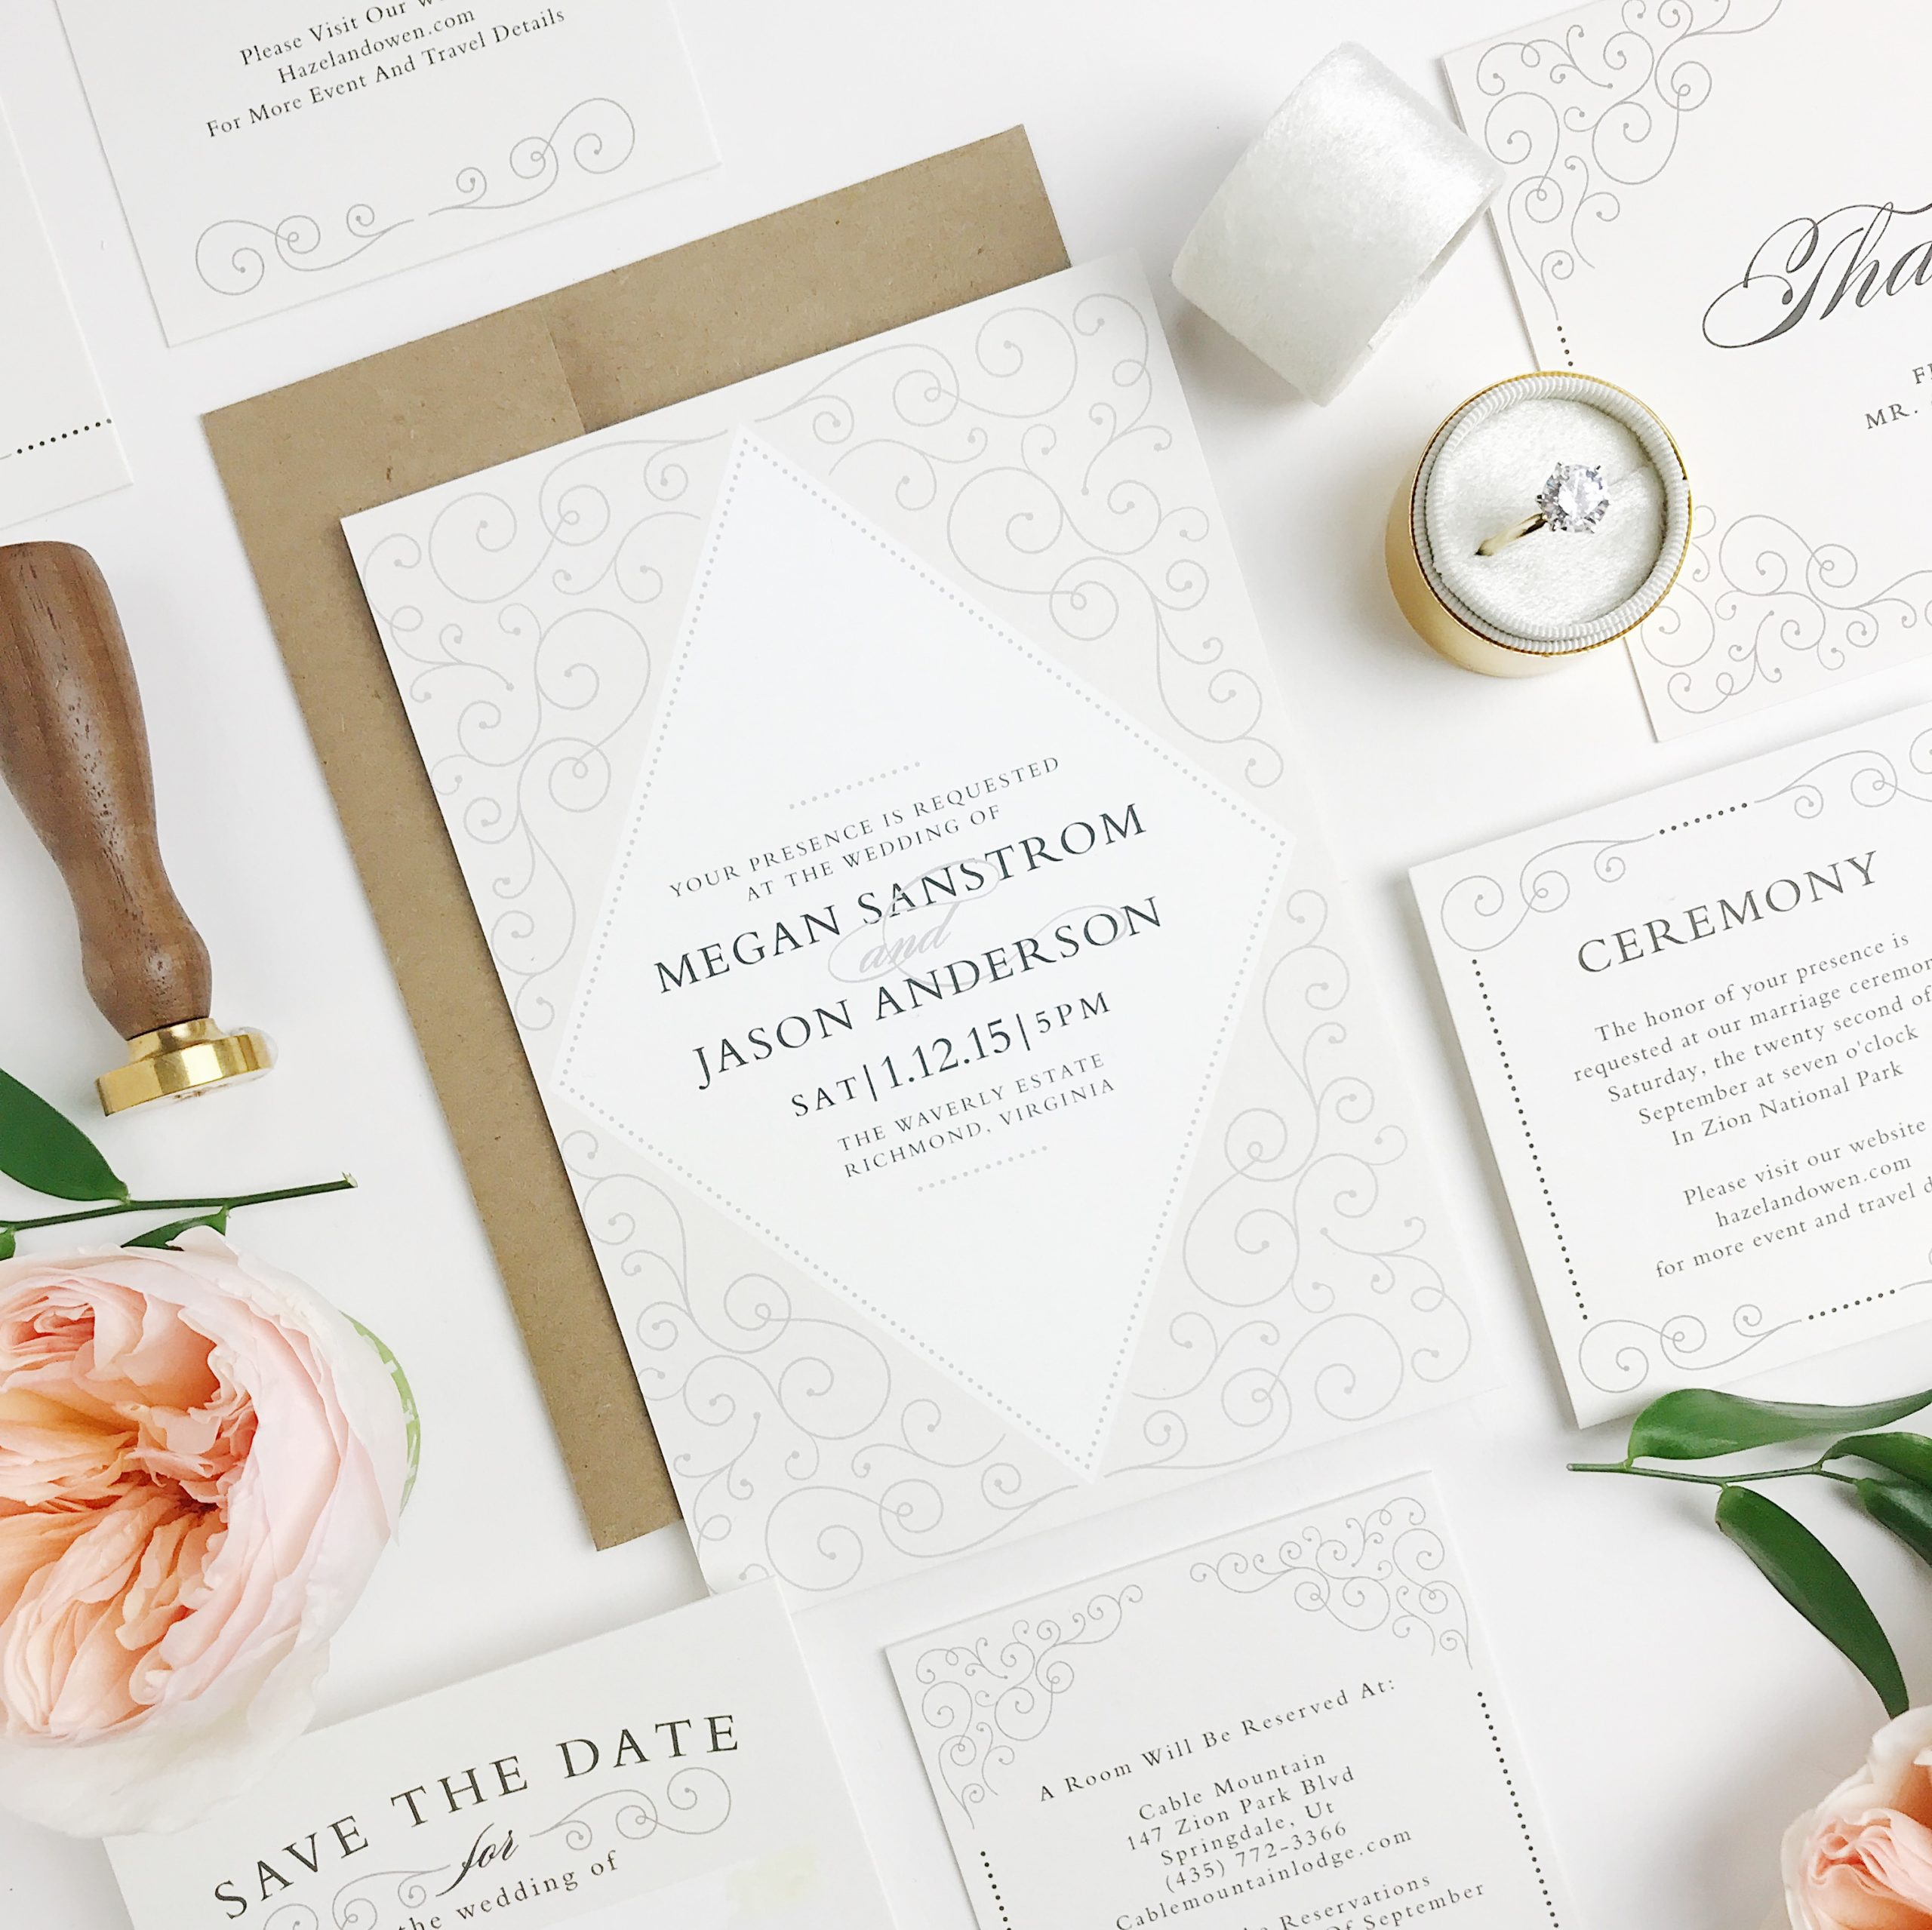 a wedding invitation, a brown envelope, and pink flowers, lay on a table.basic invite wedding invitations online toronto wedding photographer